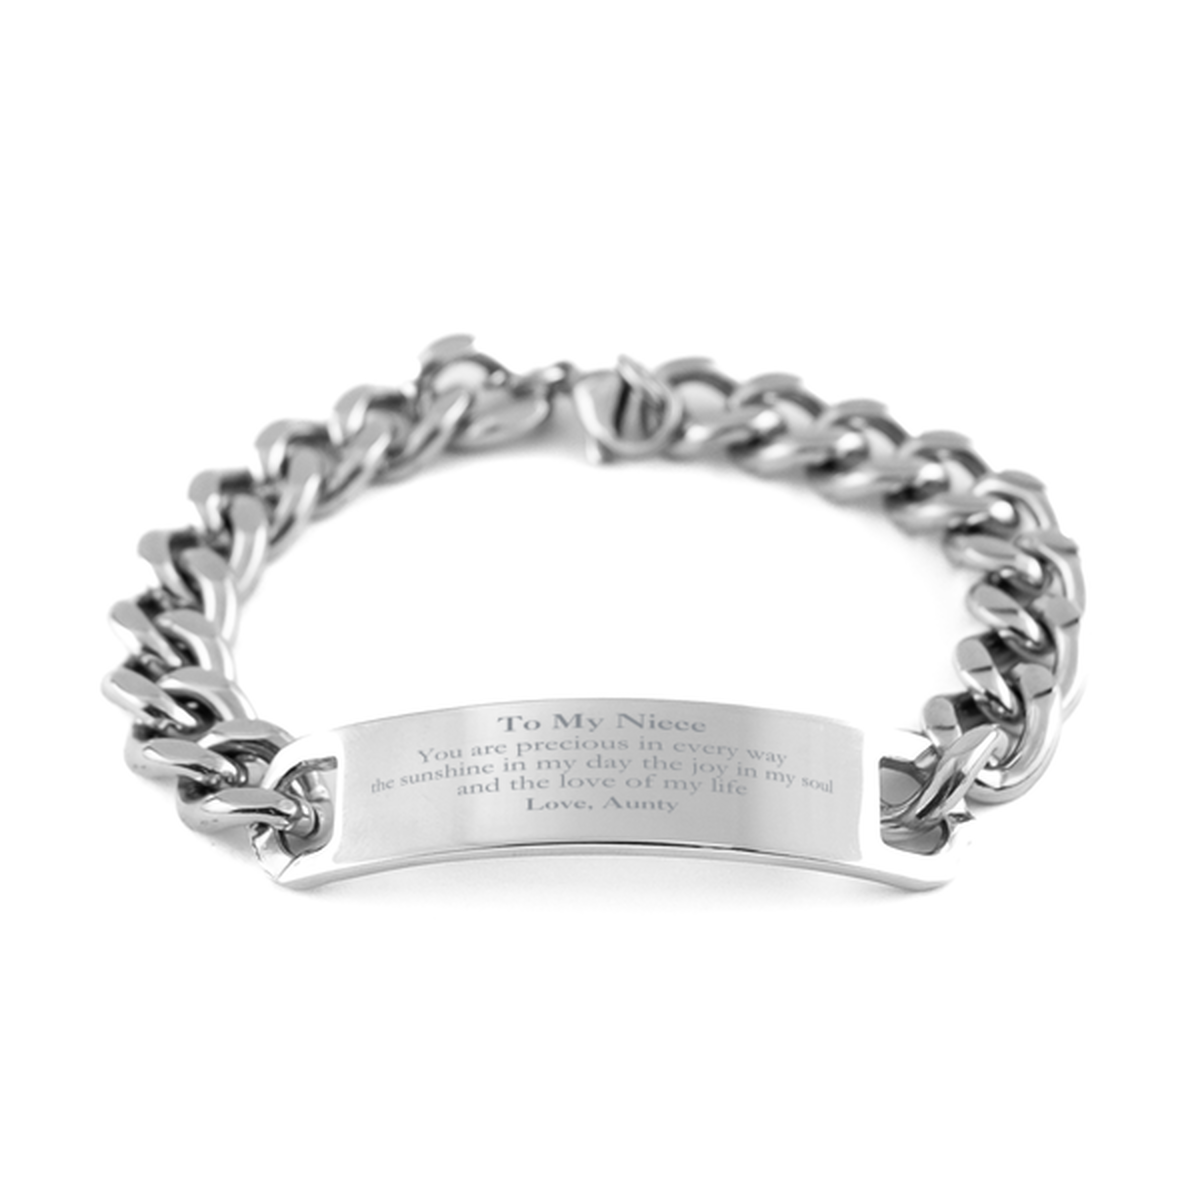 Graduation Gifts for Niece Cuban Chain Stainless Steel Bracelet Present from Aunty, Christmas Niece Birthday Gifts Niece You are precious in every way the sunshine in my day. Love, Aunty